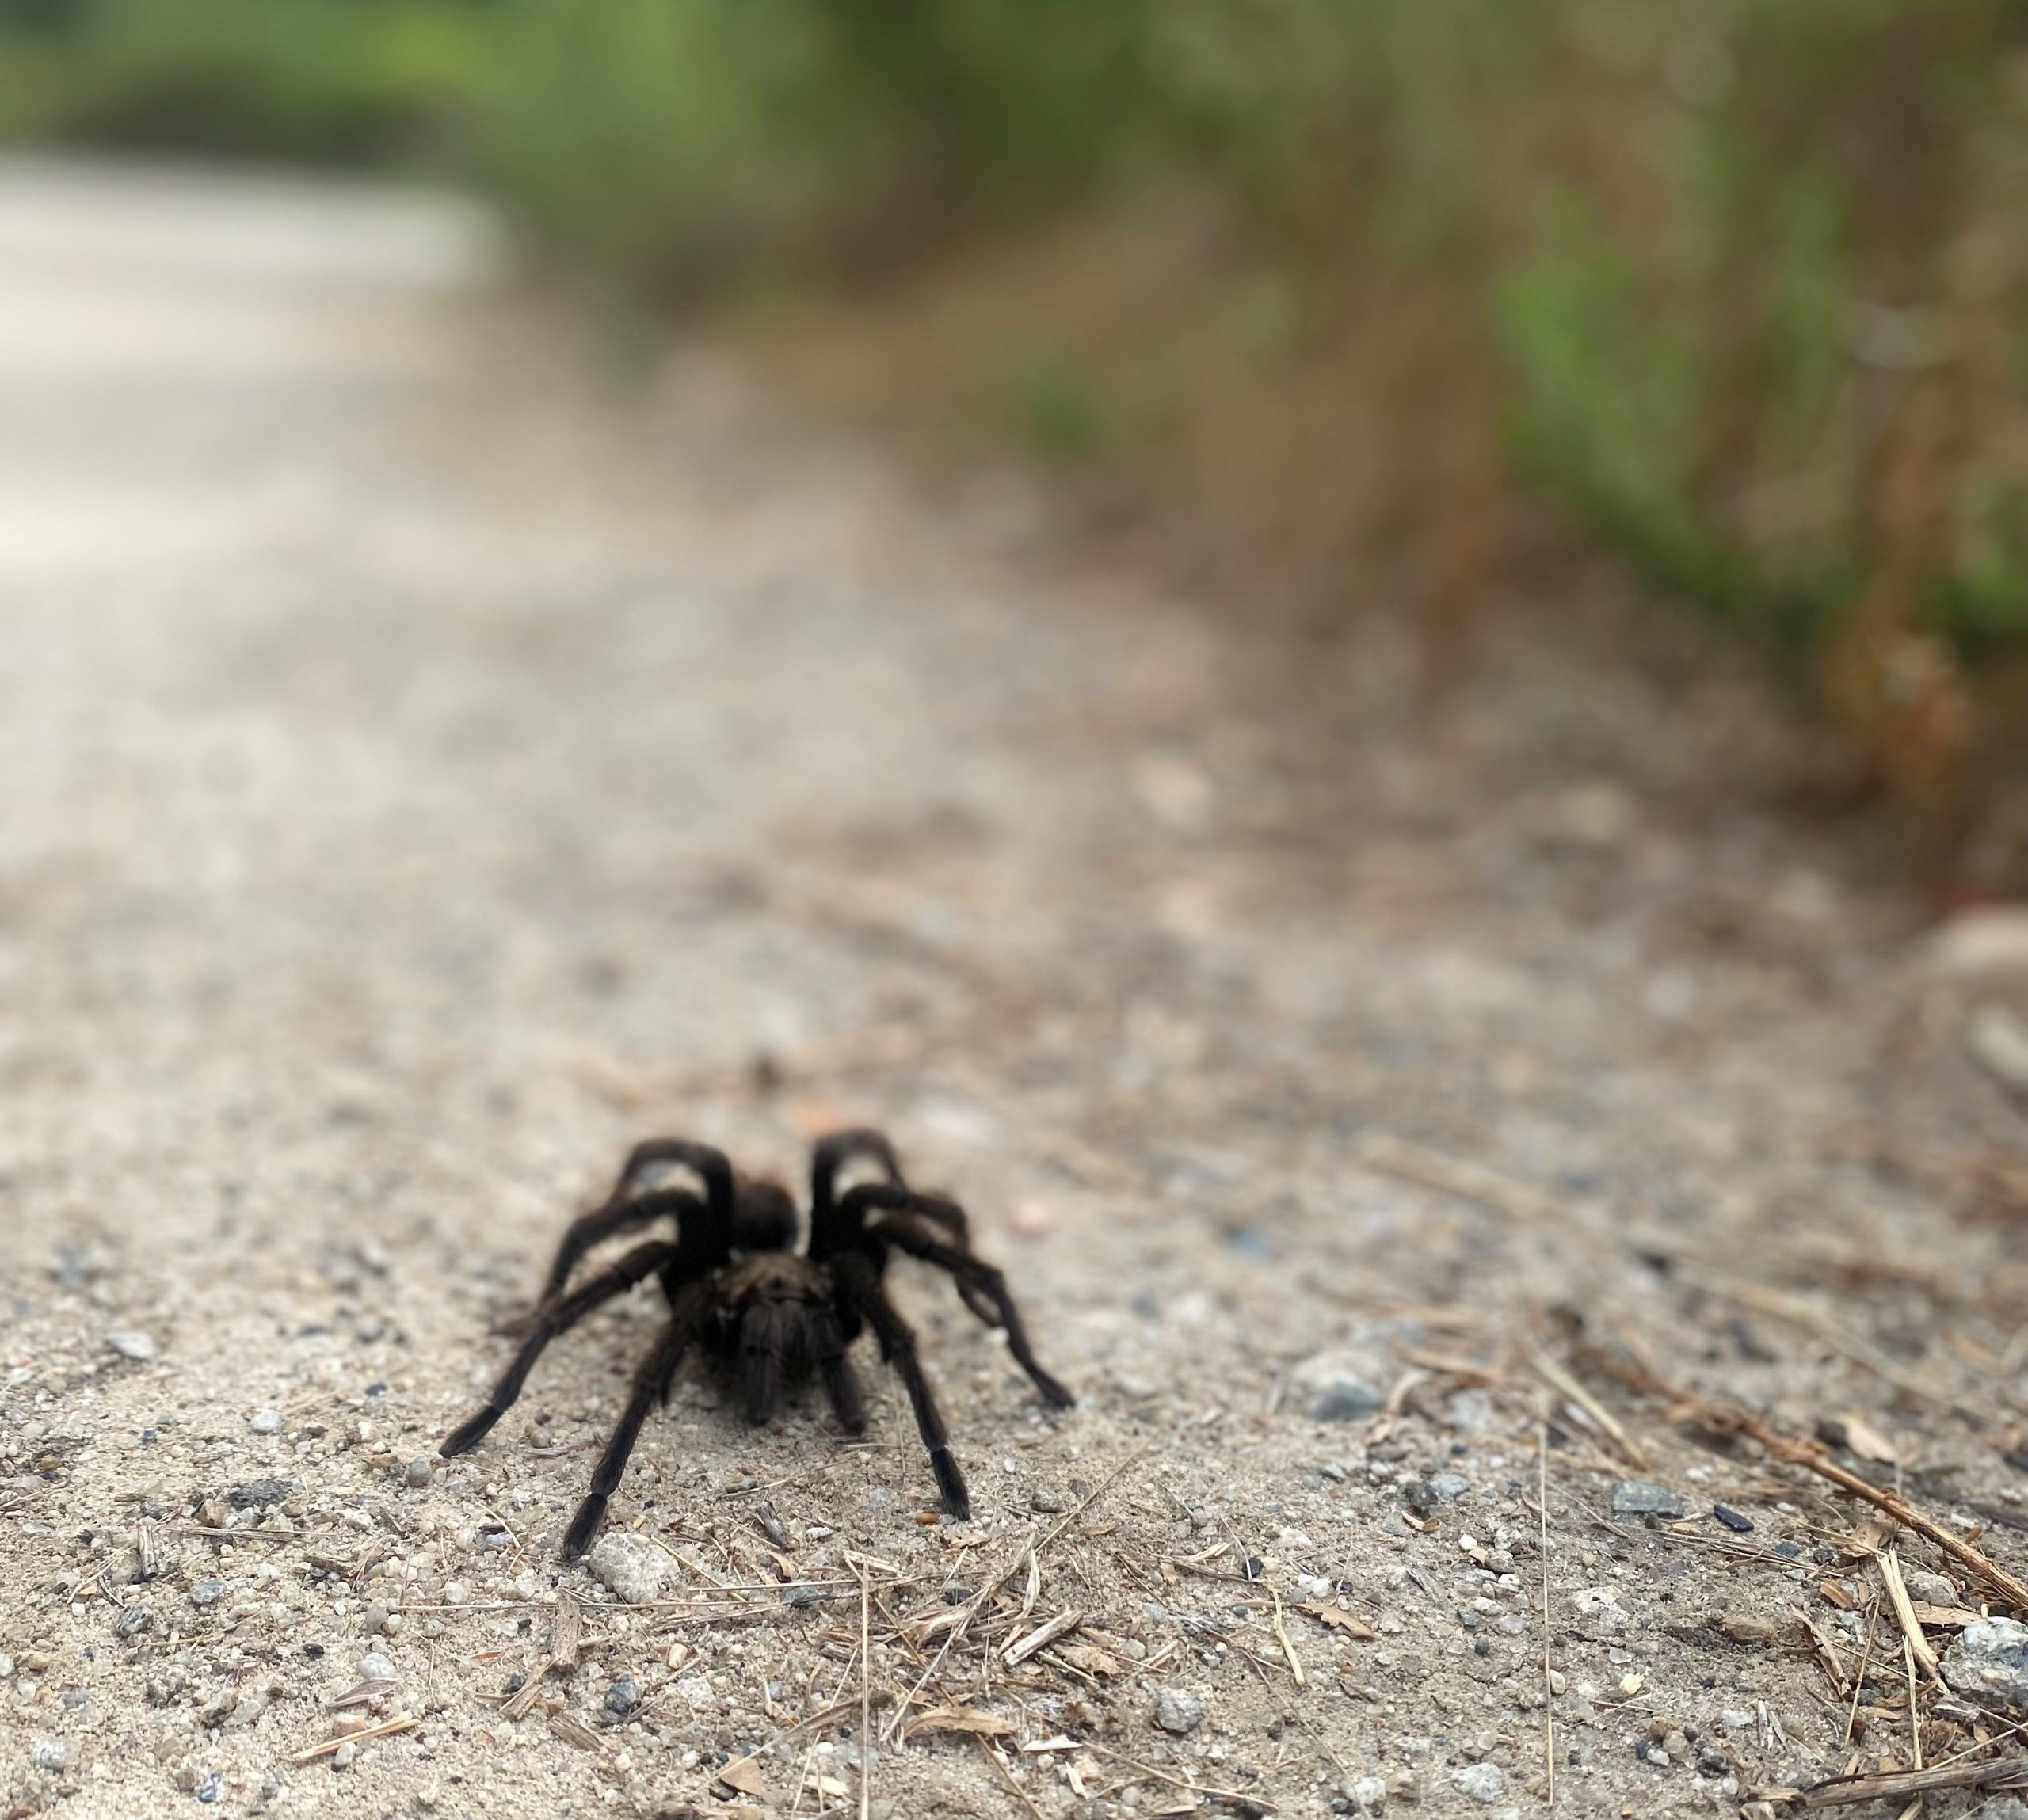 Tarantulas and Other Many-Legged Critters of the Night Walk